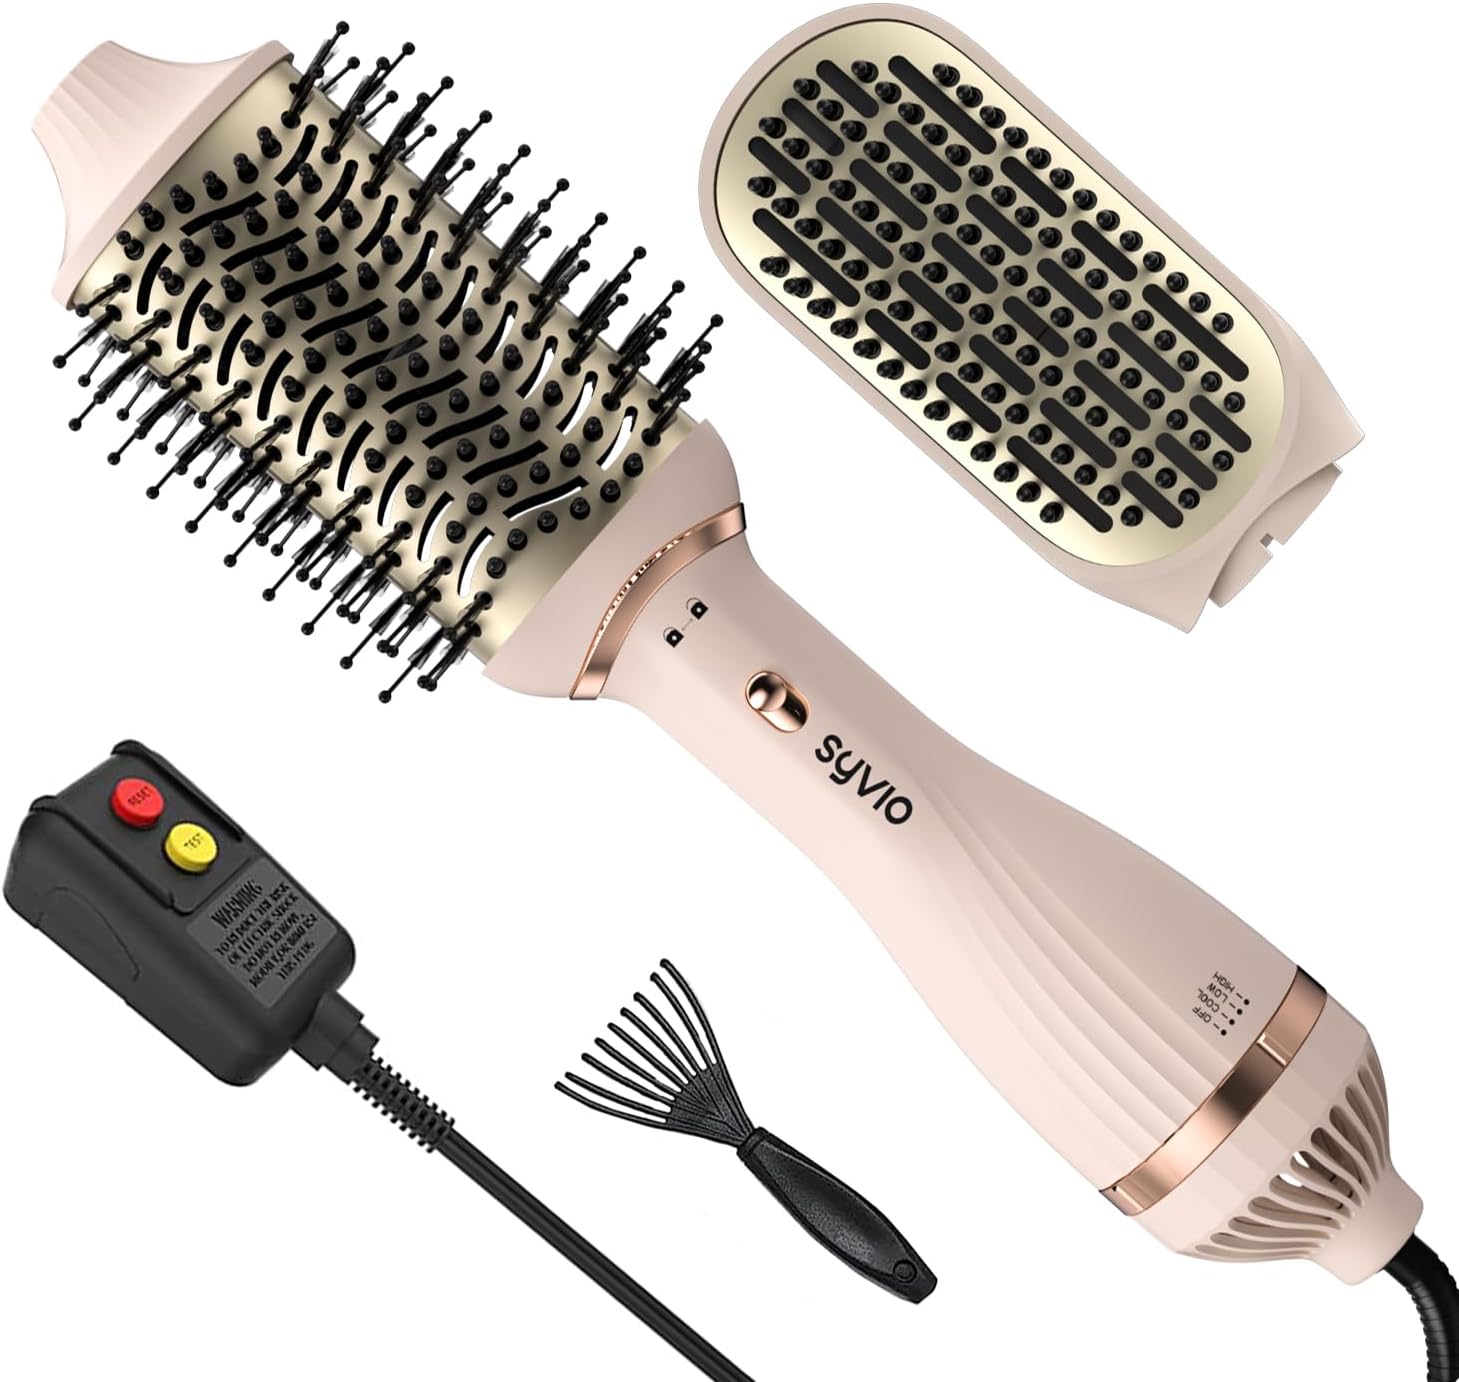 Syvio 4-in-1 Hair Dryer Brush, Detachable Oval & Flat Brush, Professional One-Step Hair Dryer & Volumizer for Straightening, Curling and Styling, Anti-frizz Hot Air Brush, Pink